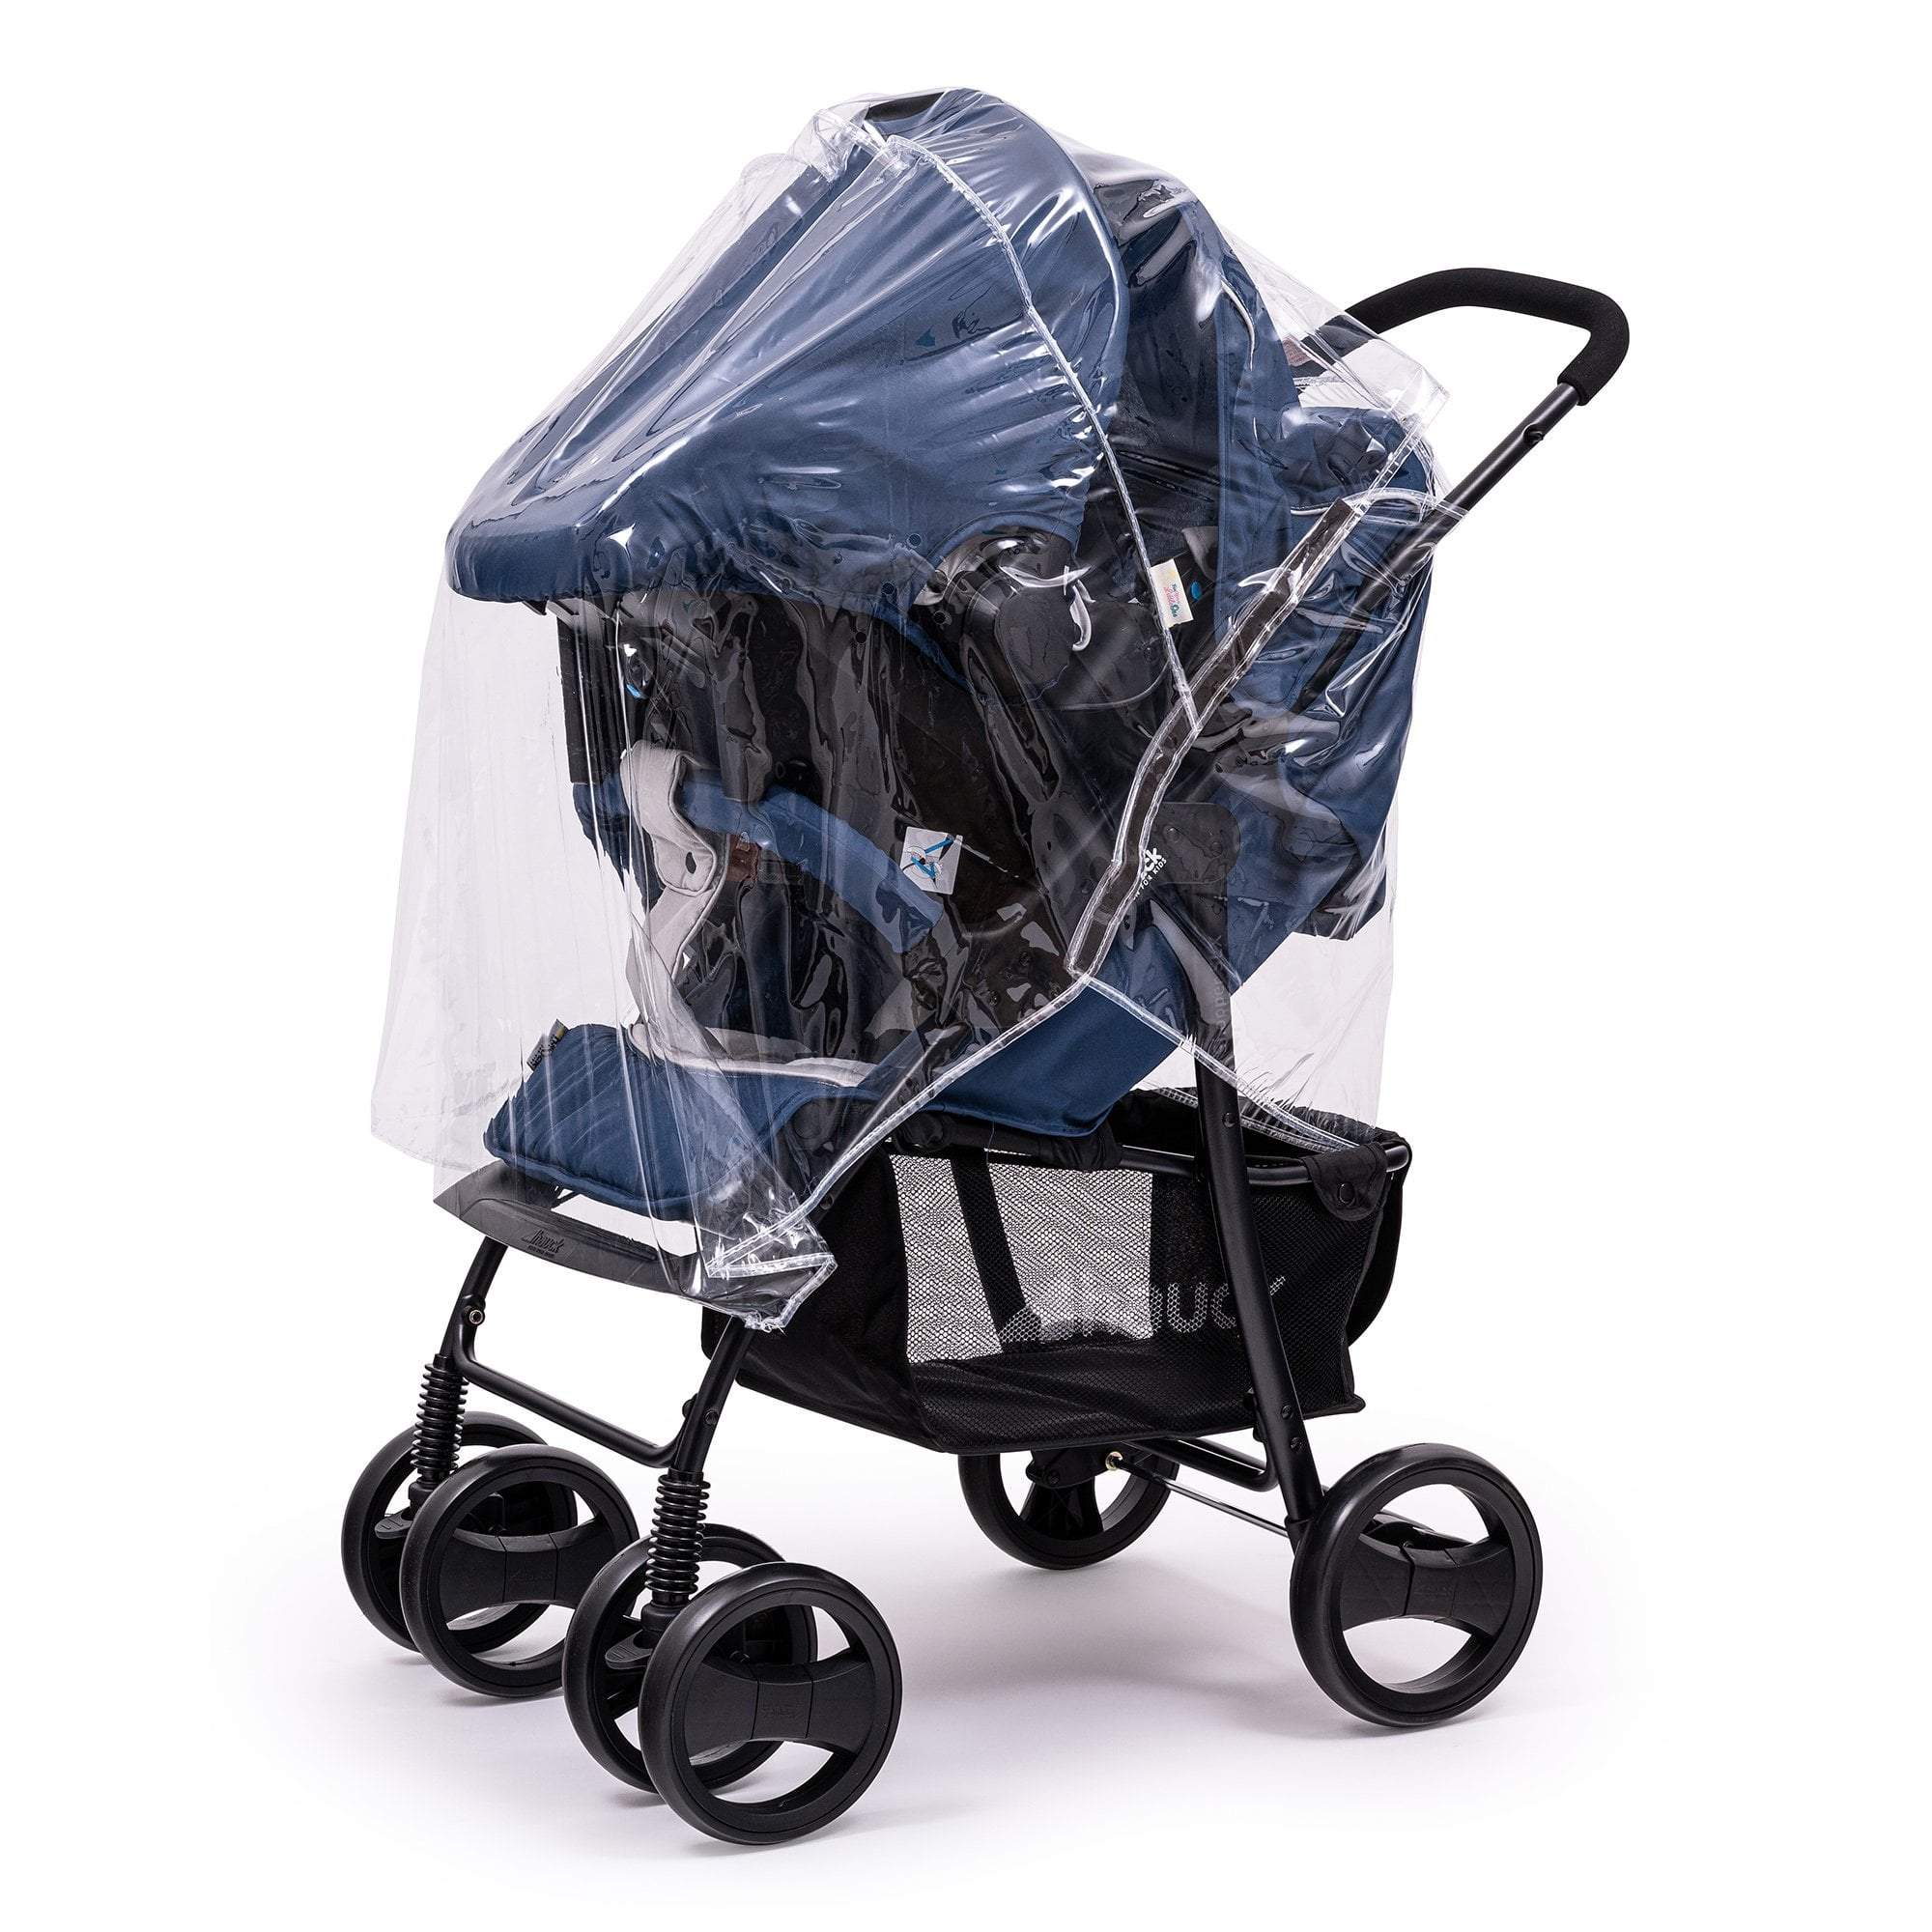 Travel System Raincover Compatible with Baby Weavers - Fits All Models - For Your Little One